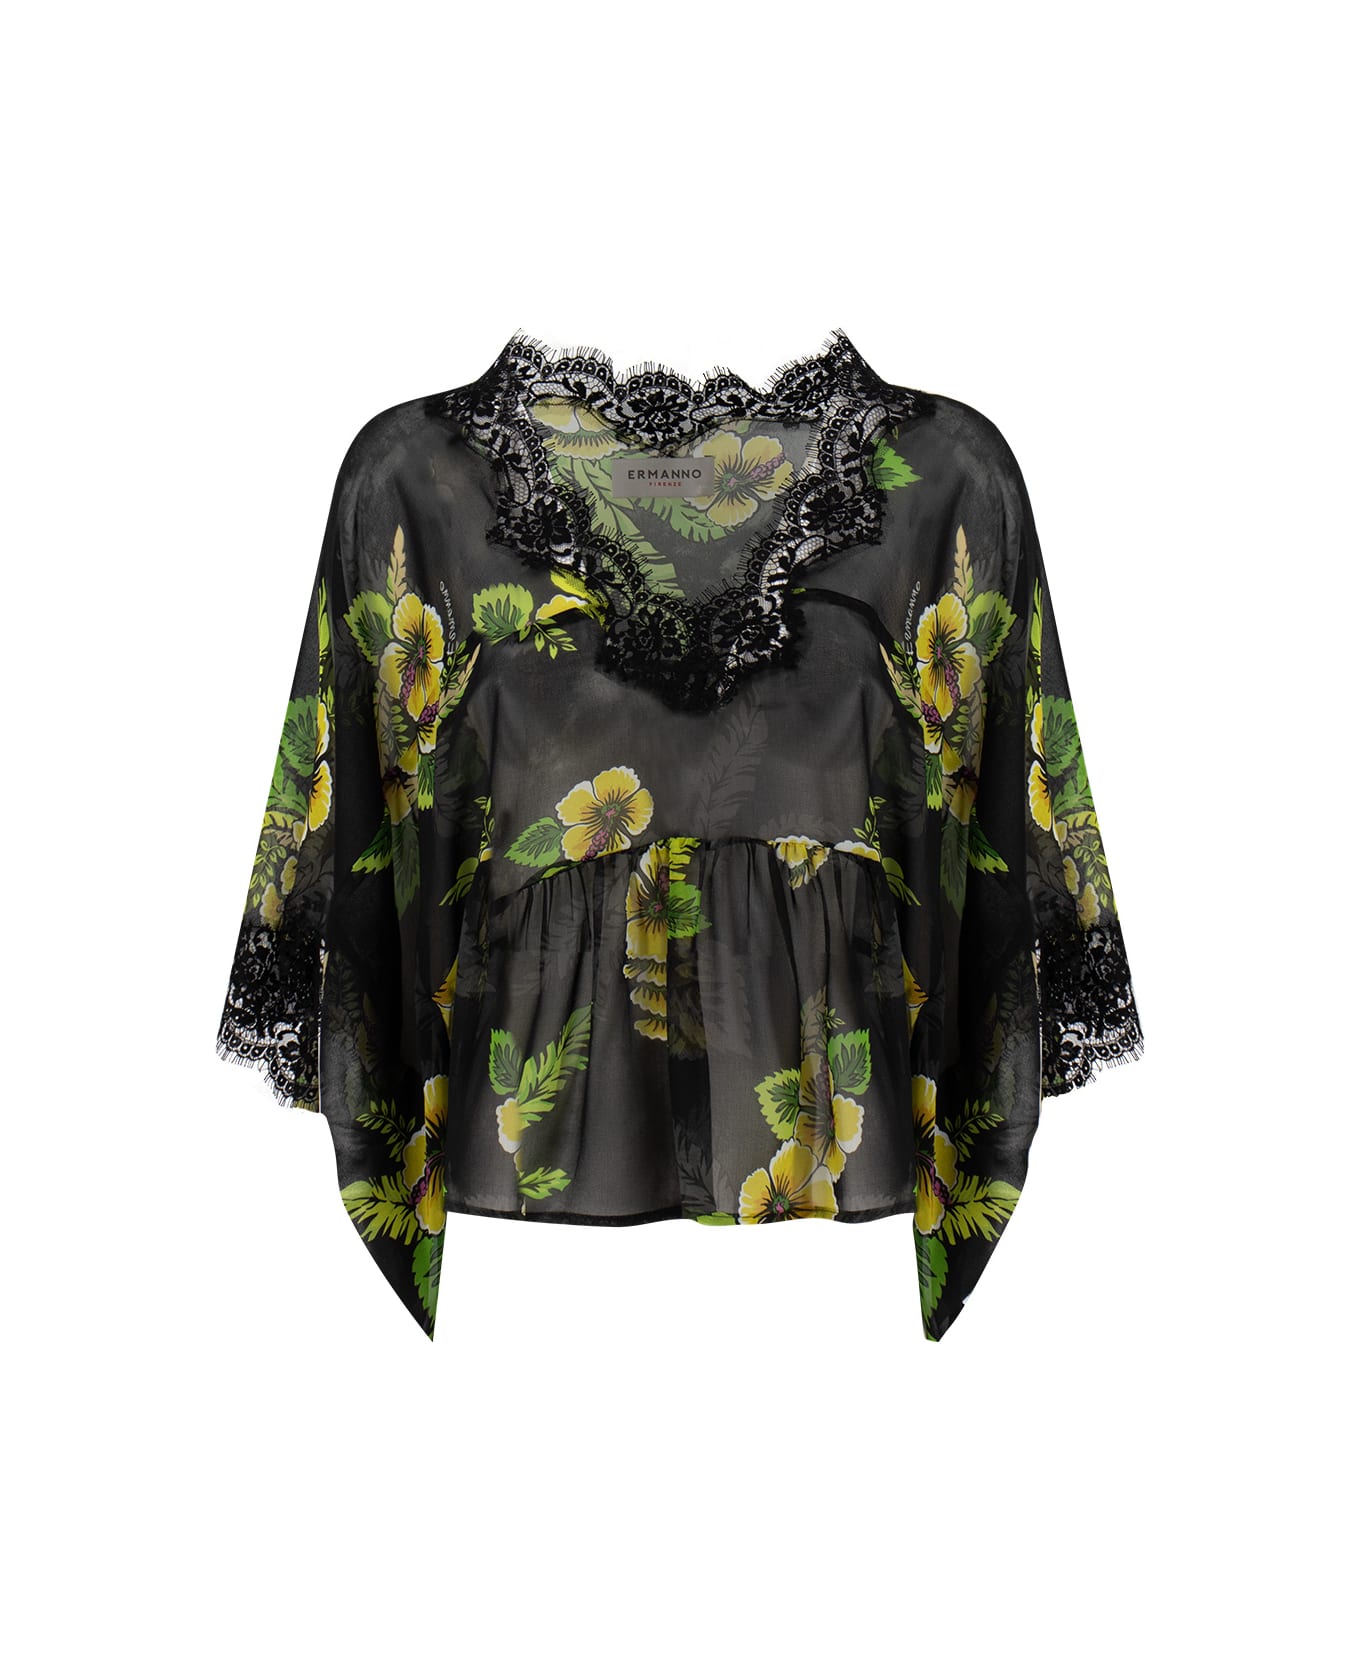 Ermanno Firenze Blouse - BLACK/YELOW/GREEN ブラウス